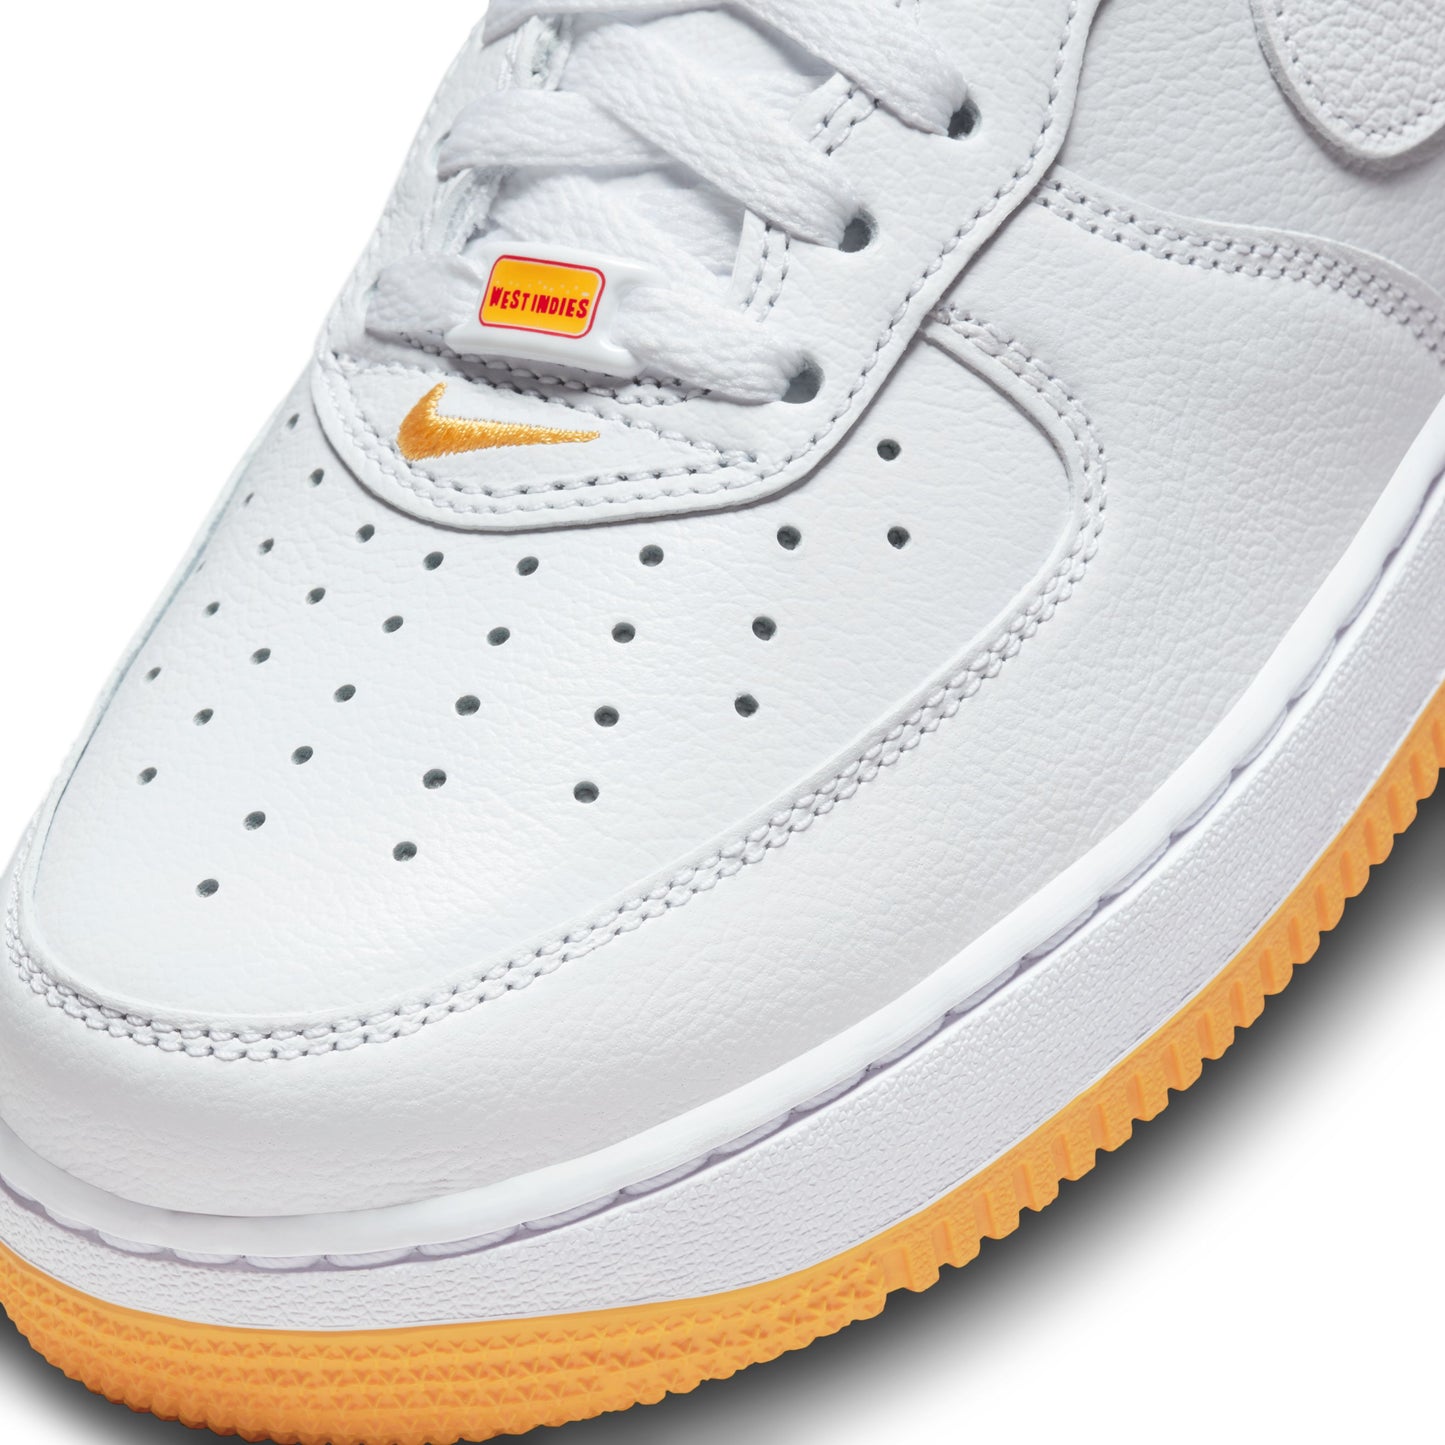 Air Force 1 Low Retro - 'West Indies' - White/University Gold